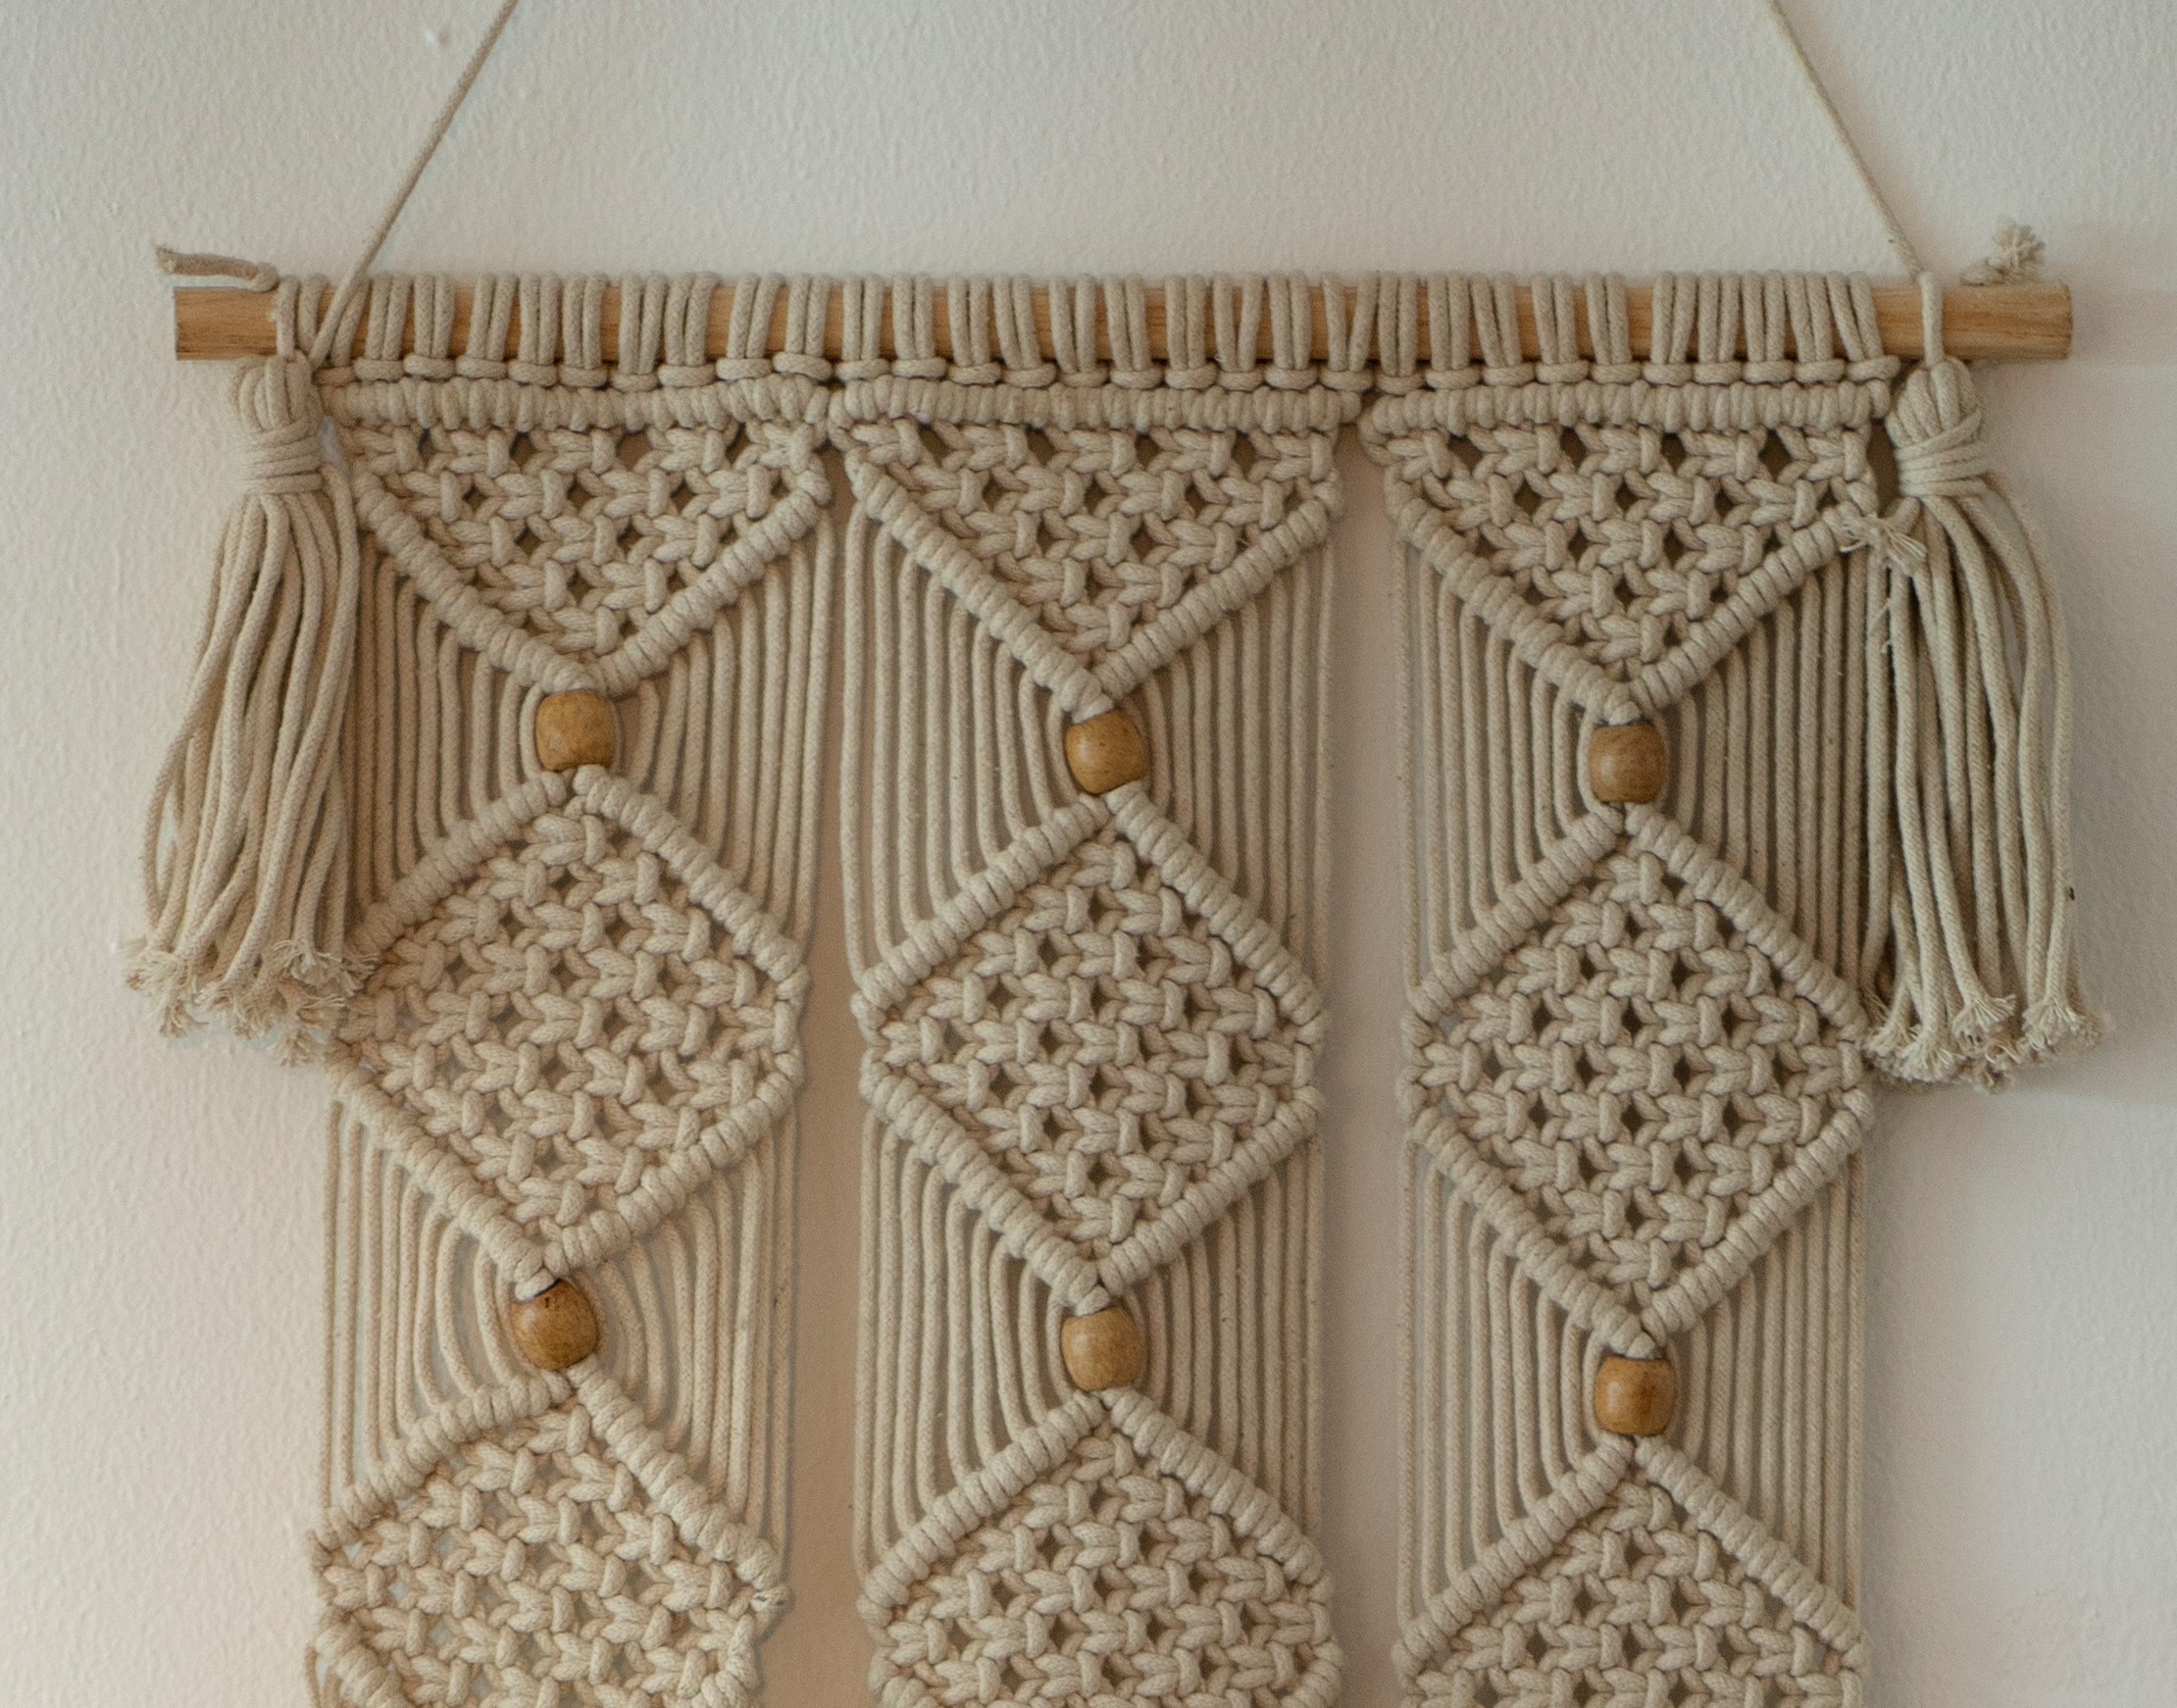 Tan macramé project hanging on a white wall 